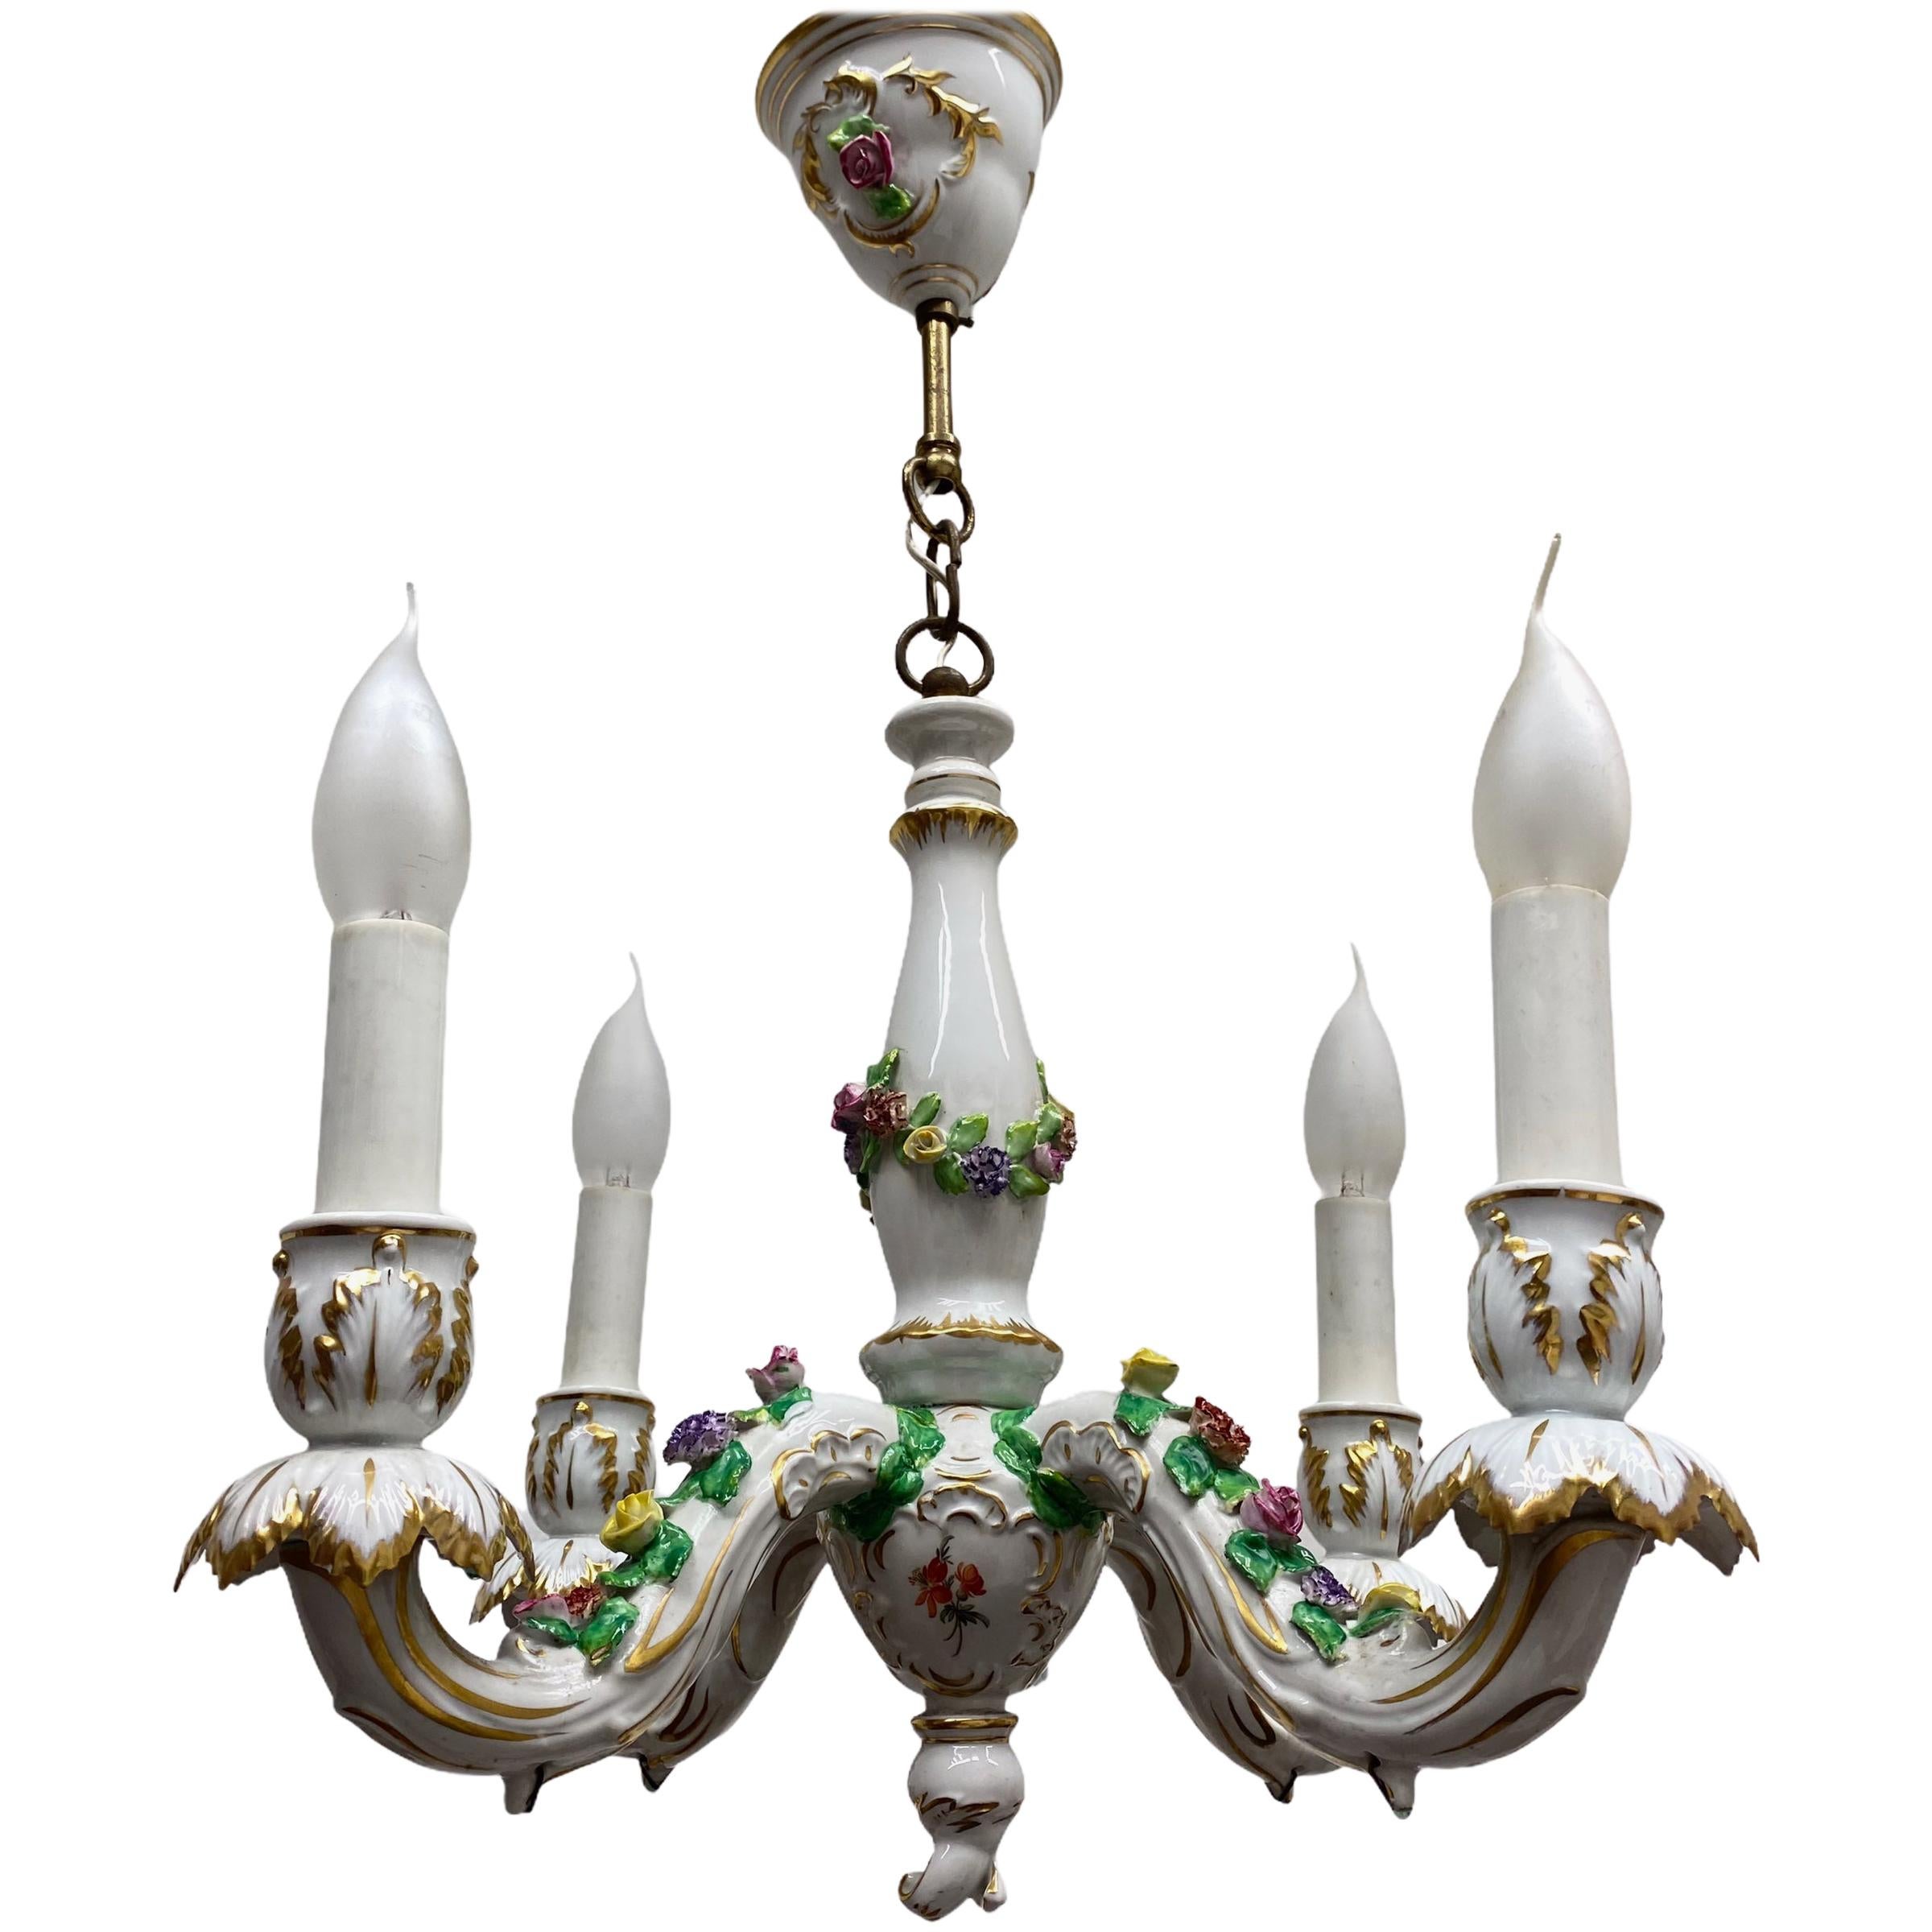 Petite Chandelier Hand Painted and Gilded Porcelain, circa 1940